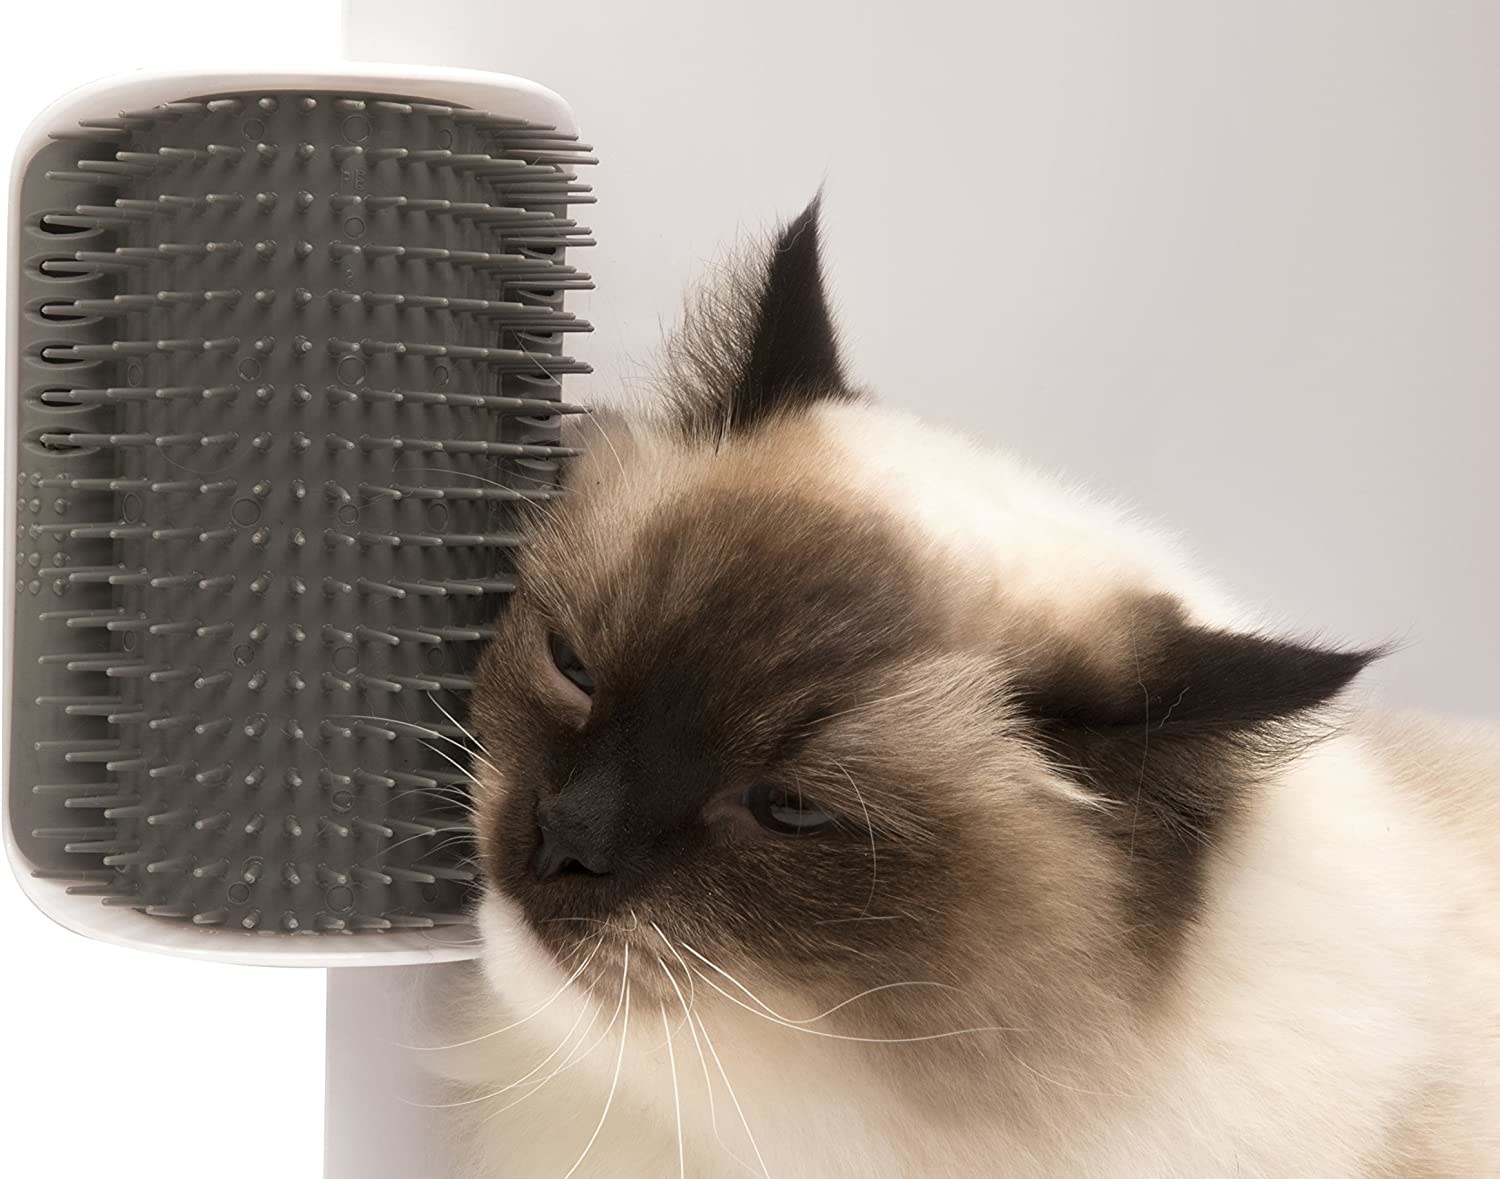 a cat rubbing its face against the self-grooming brush